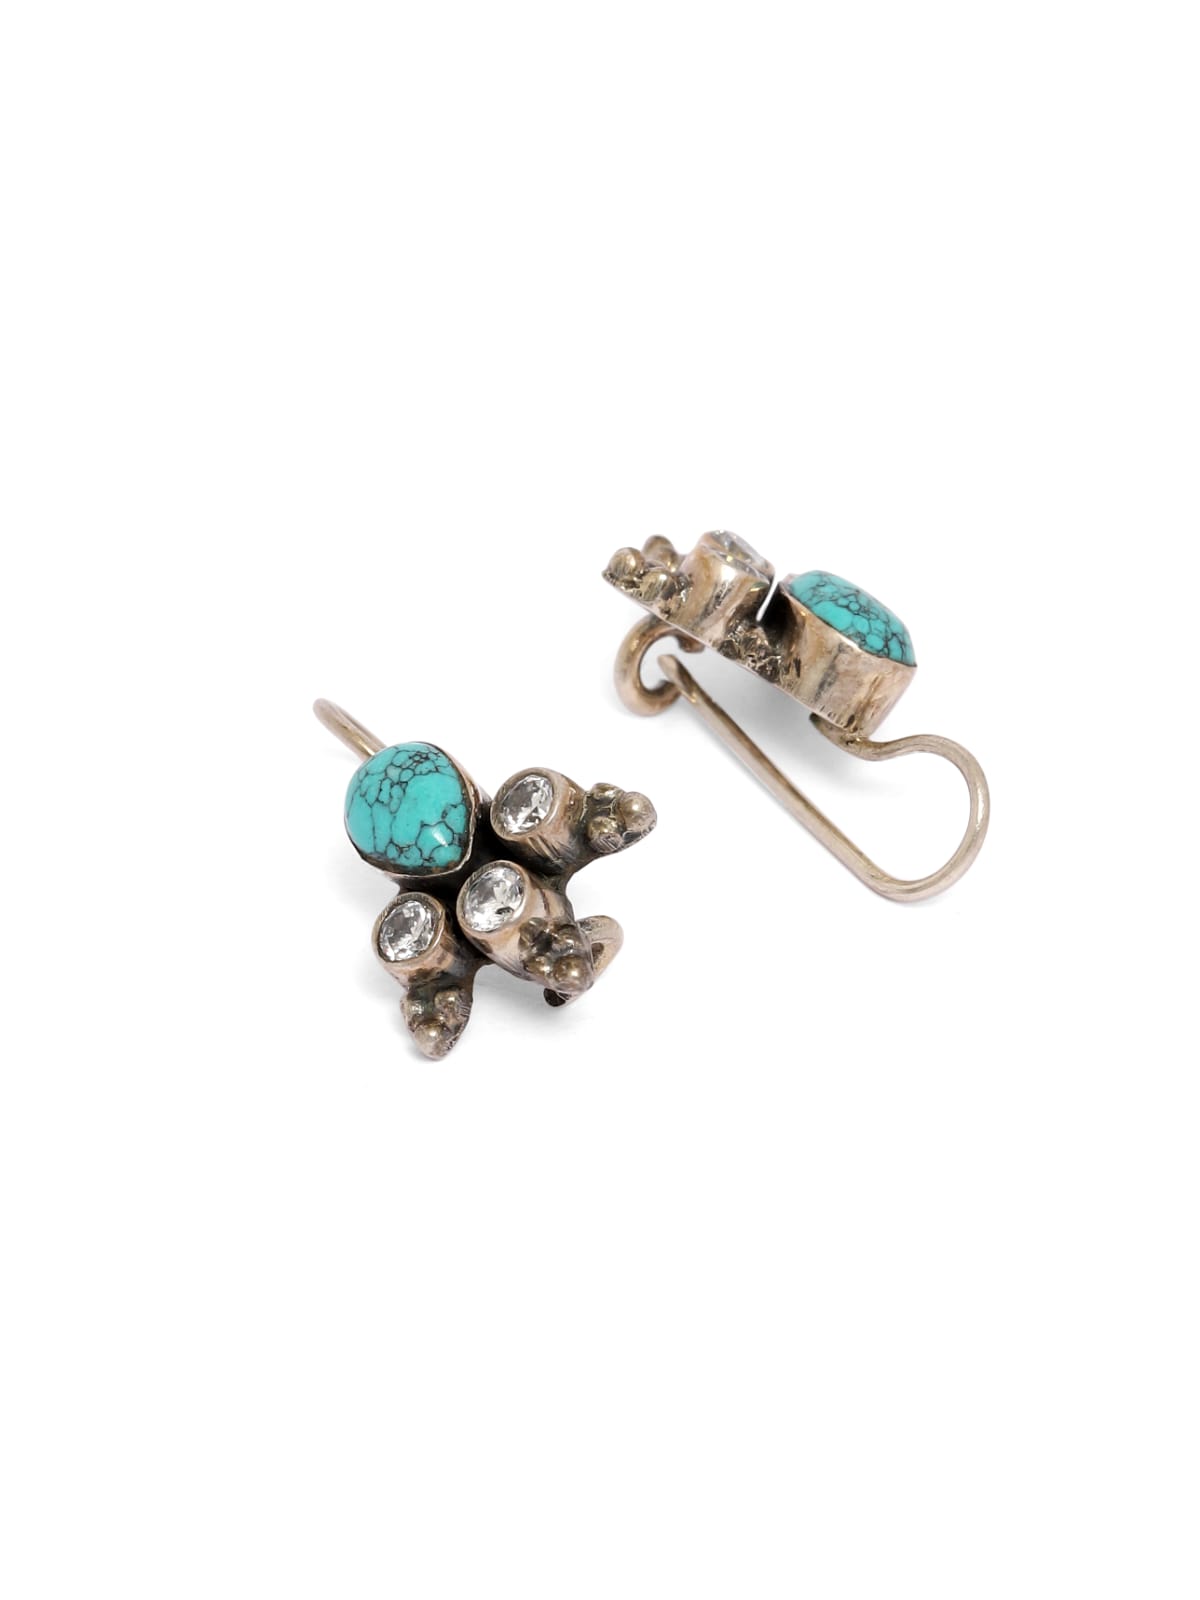 Sterling Silver hook earrings with Turquoise and cubic Zirconia in Oxidised plating.